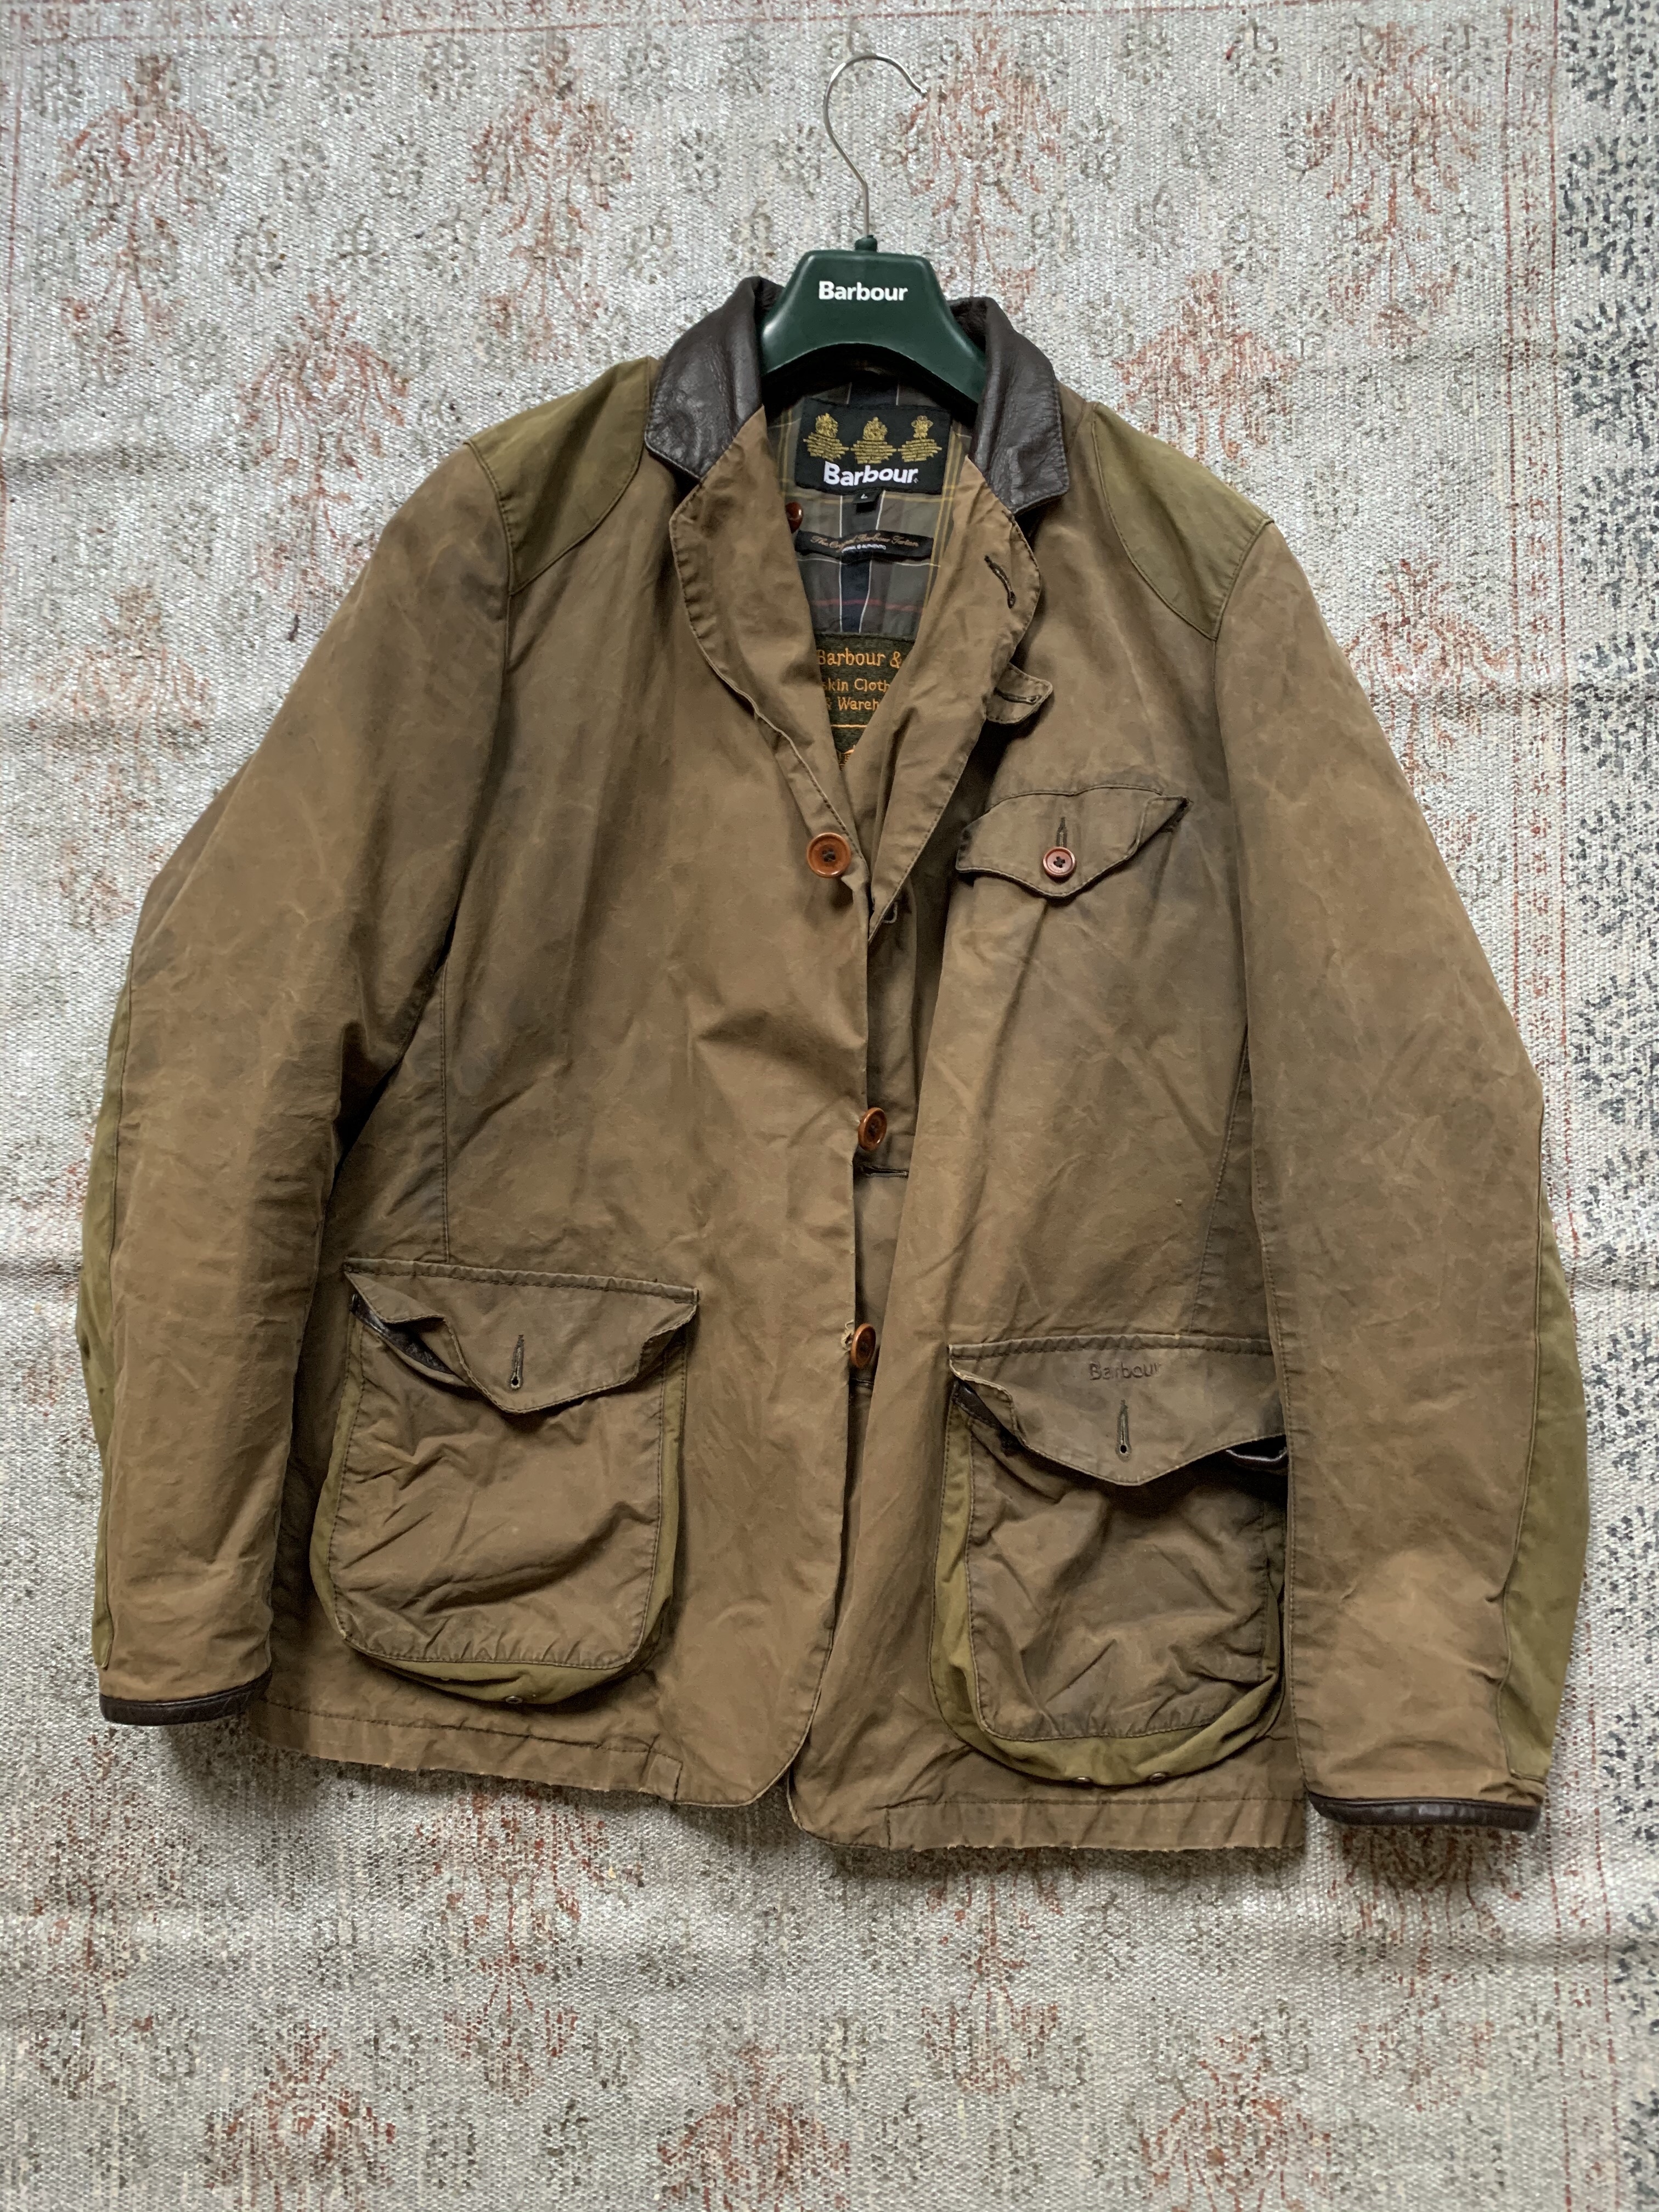 The Barbour ToKiTo Sports Jacket “The 